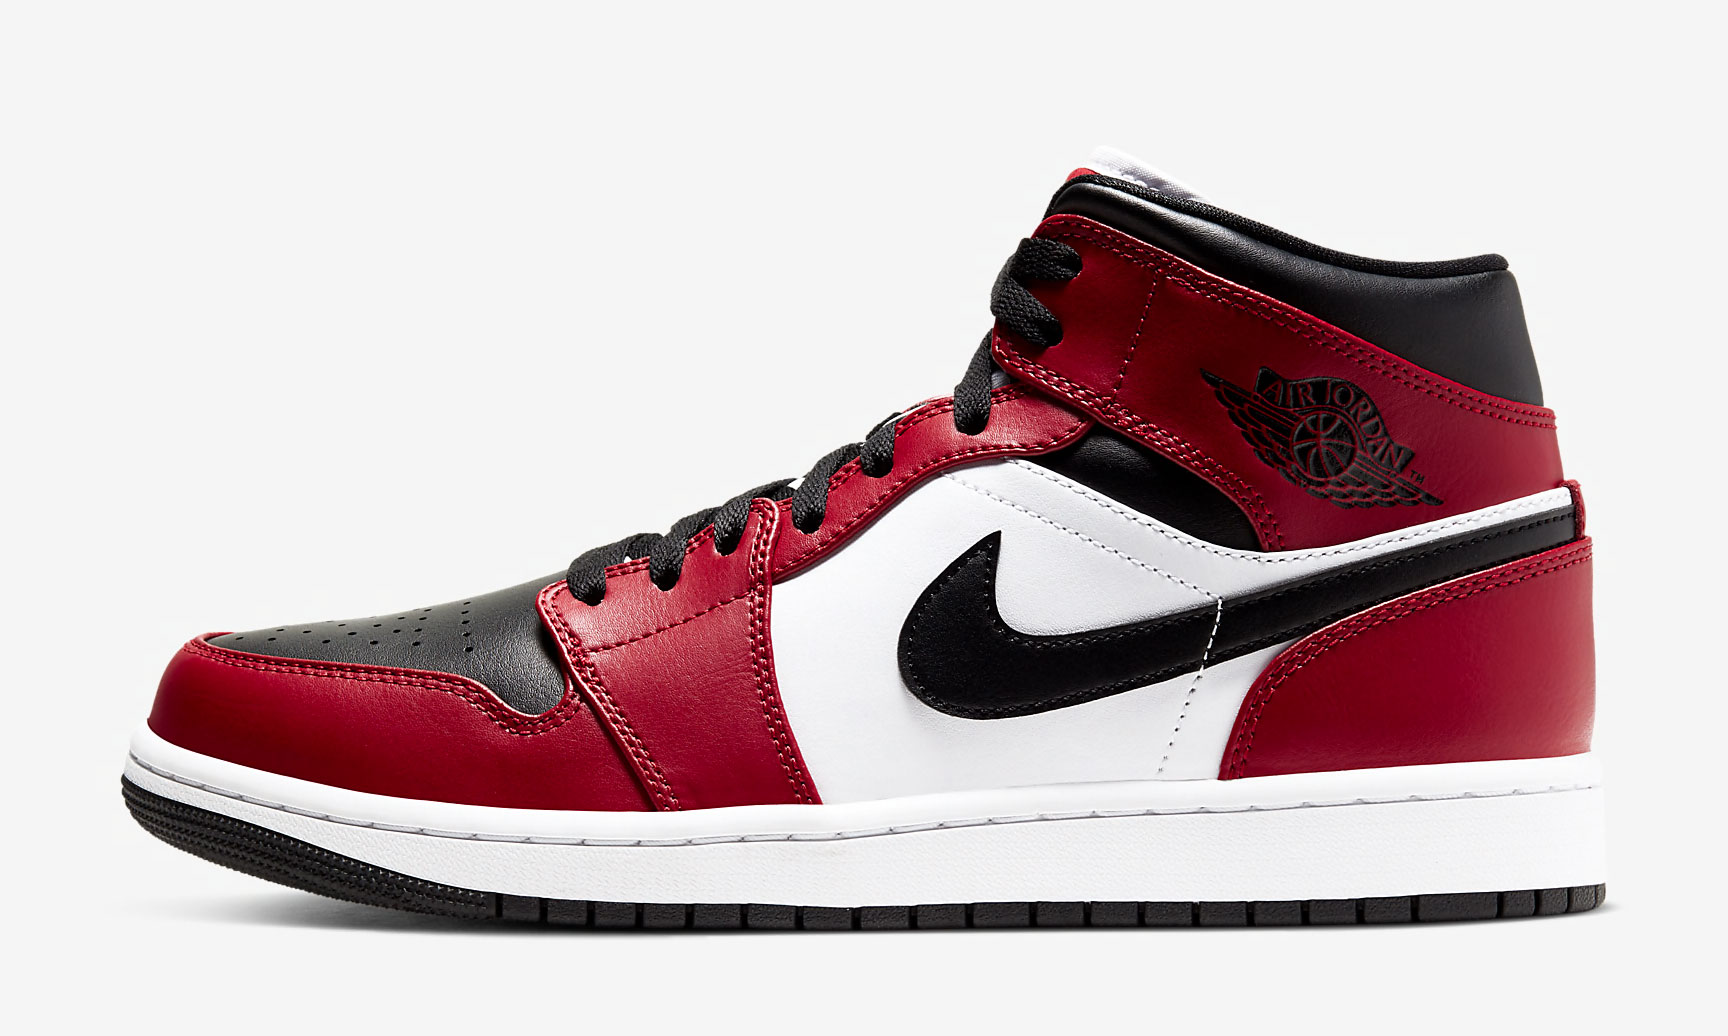 jordan 1 mid chicago toe outfit